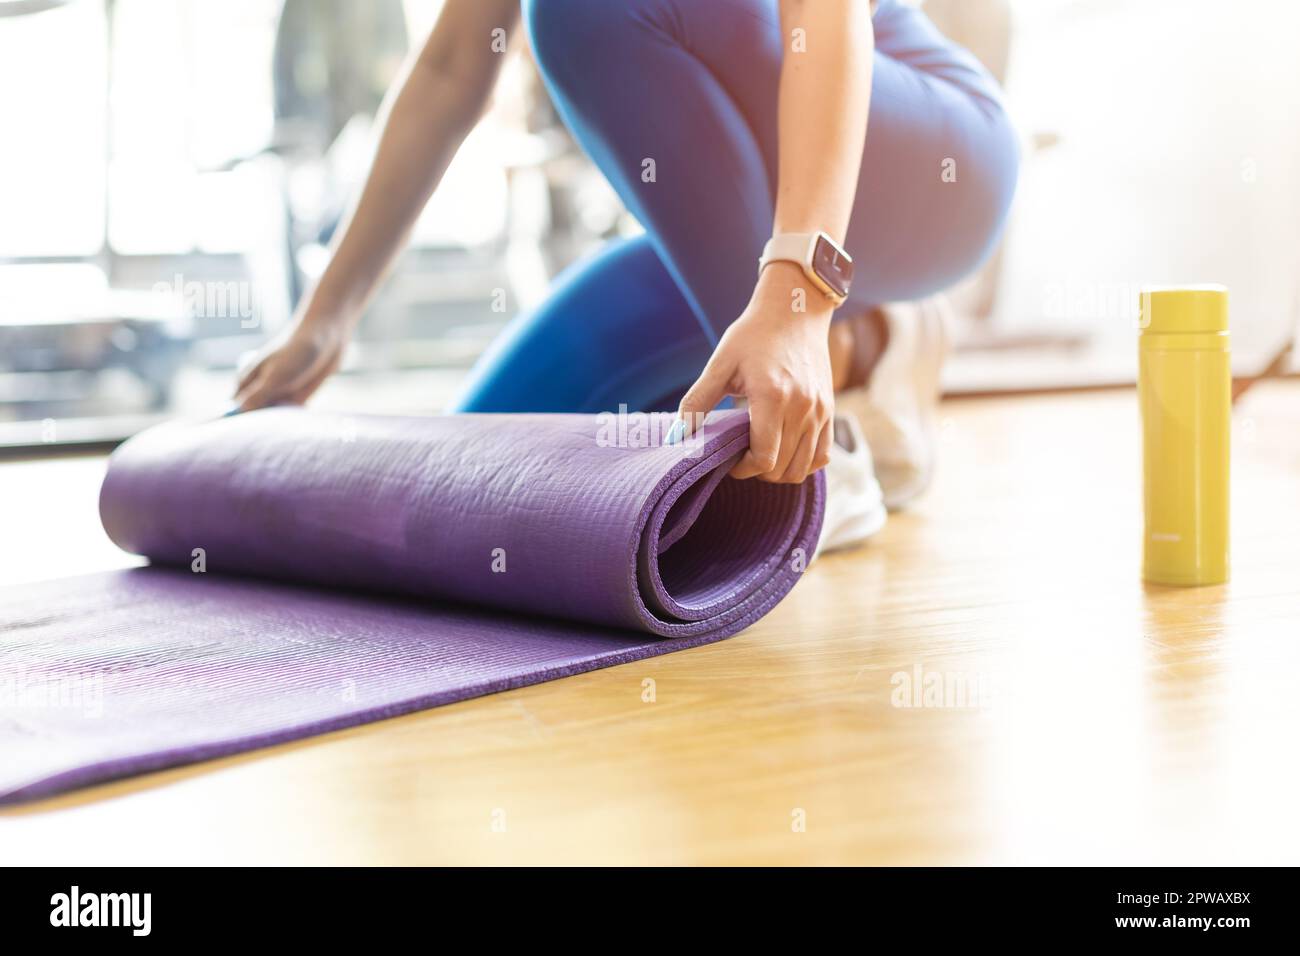 Yoga Mat. Closeup womans hands is rolling TPE rubber exercise fitness yoga mat on the floor at sport club. Stock Photo